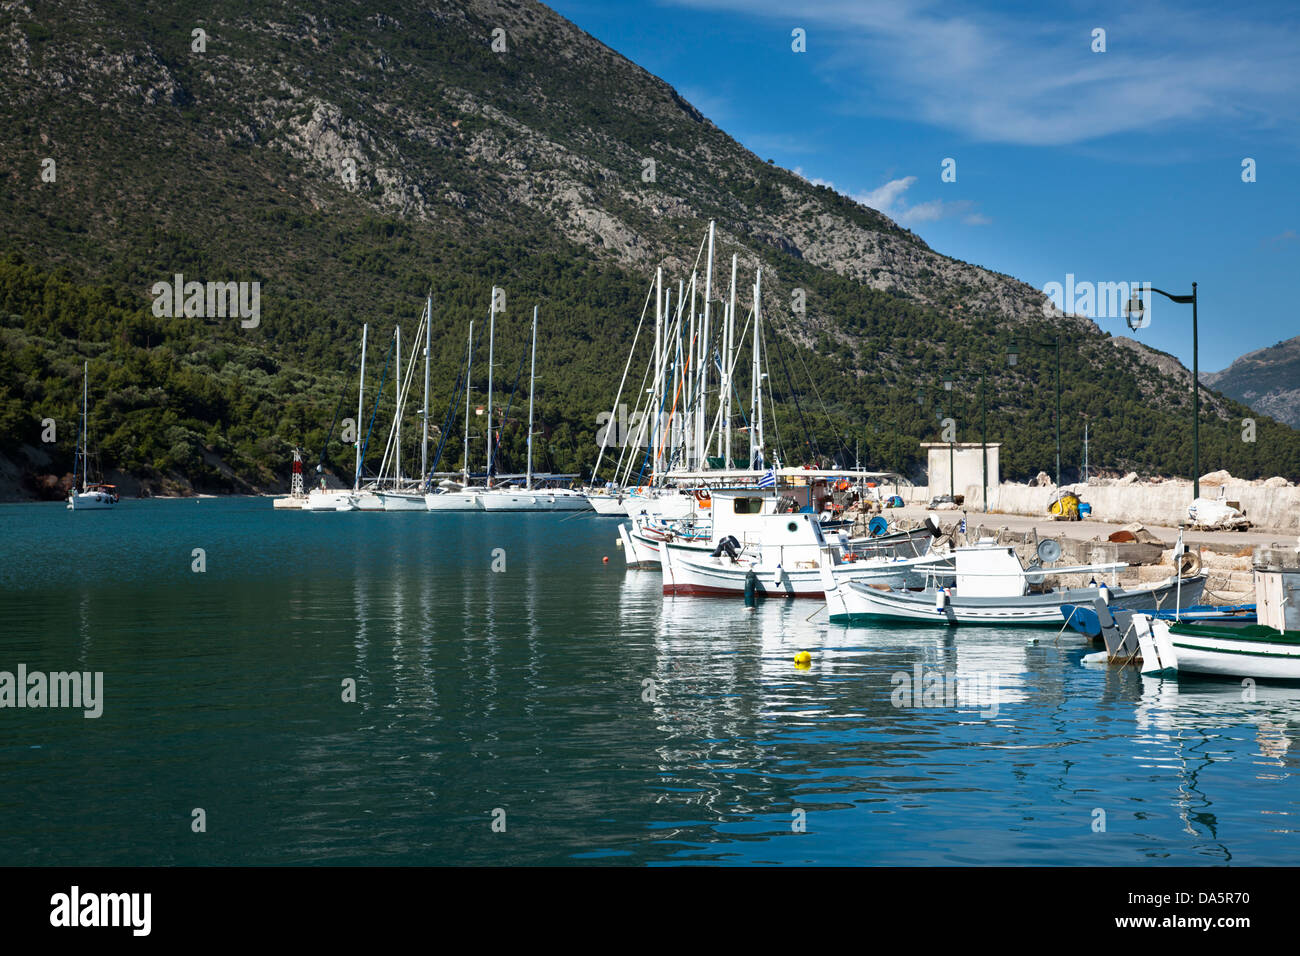 A yacht enters the harbour at Kalamos, Greece Stock Photo